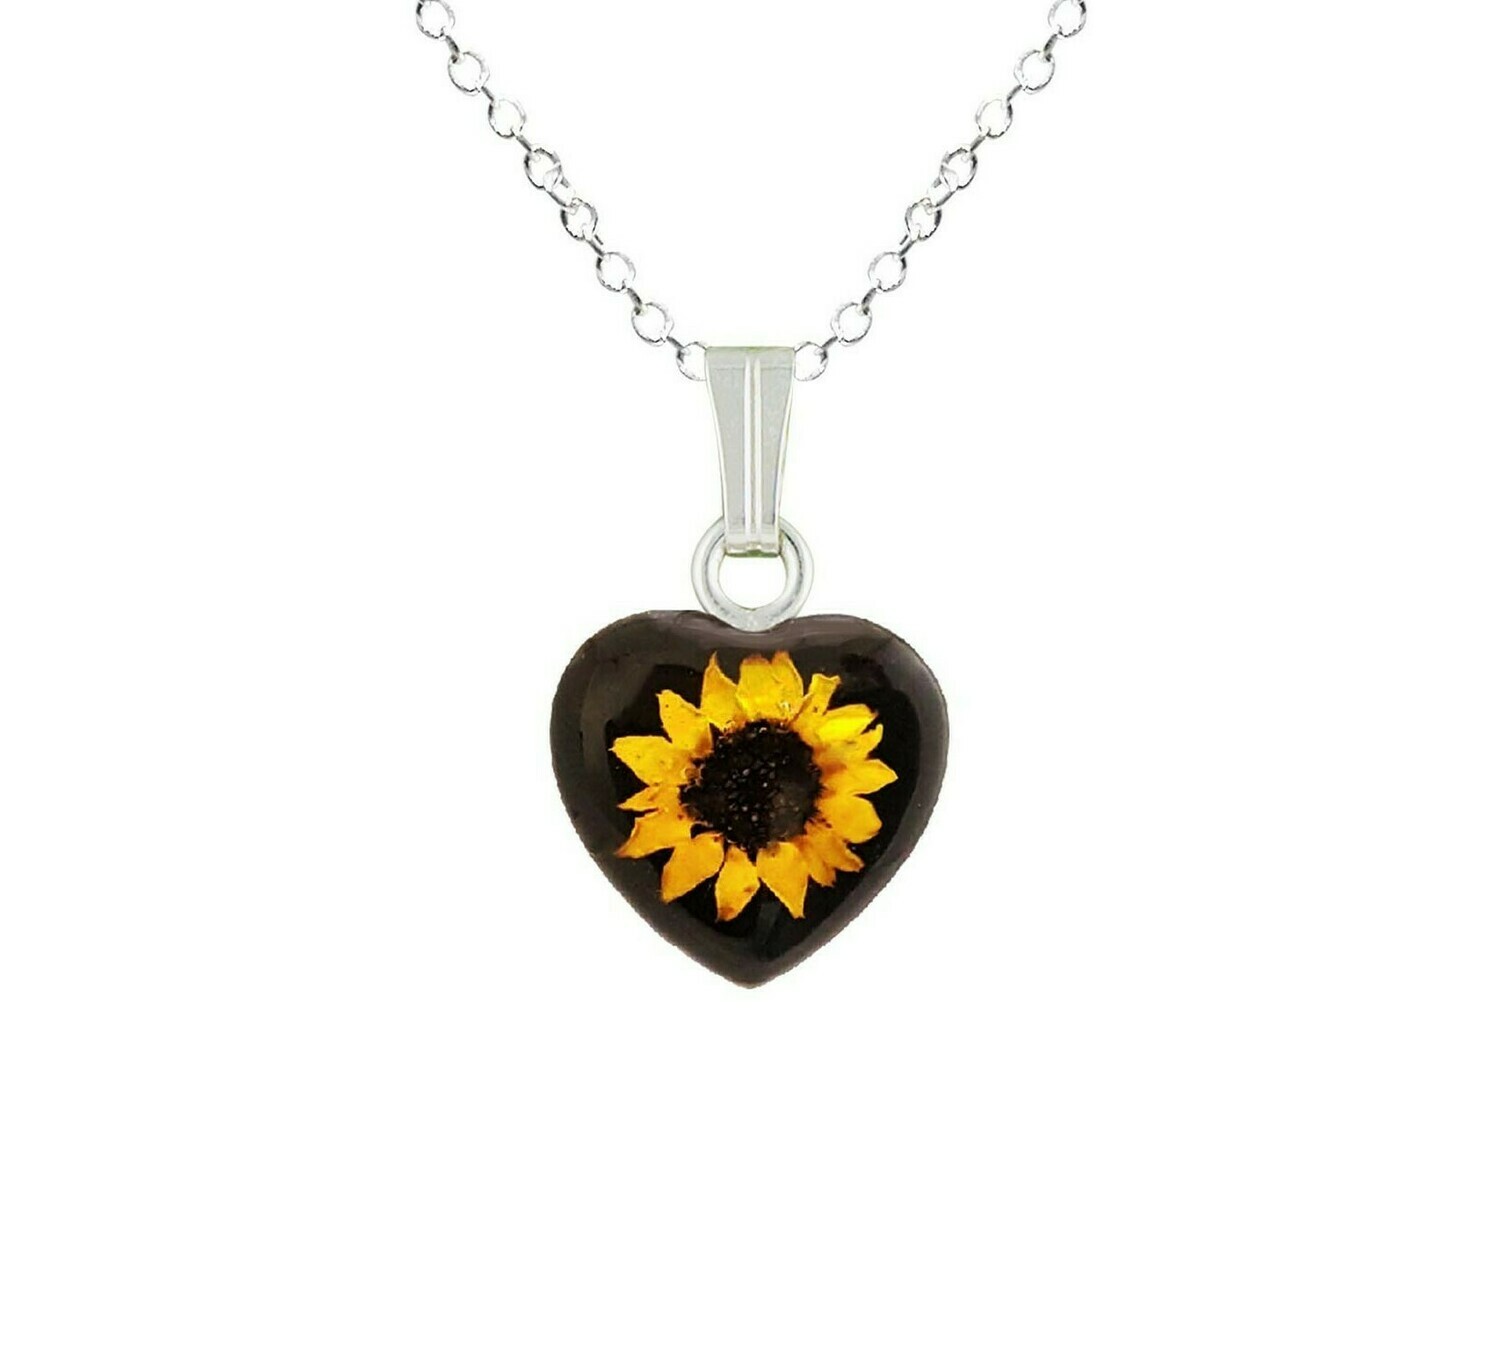 Sunflower Necklace, Small Heart, Black Background